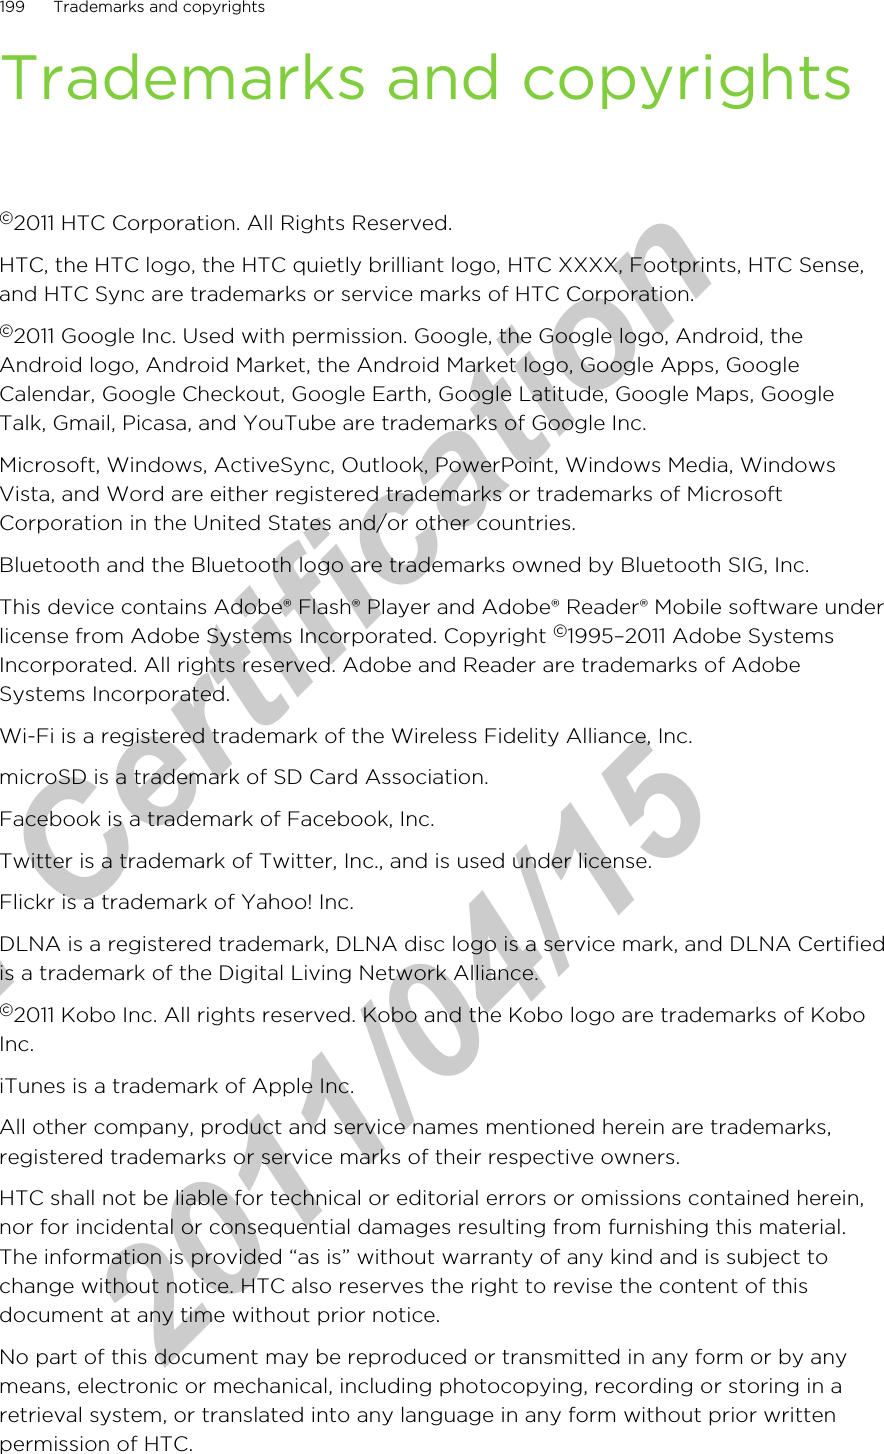 Trademarks and copyrights©2011 HTC Corporation. All Rights Reserved.HTC, the HTC logo, the HTC quietly brilliant logo, HTC XXXX, Footprints, HTC Sense,and HTC Sync are trademarks or service marks of HTC Corporation.©2011 Google Inc. Used with permission. Google, the Google logo, Android, theAndroid logo, Android Market, the Android Market logo, Google Apps, GoogleCalendar, Google Checkout, Google Earth, Google Latitude, Google Maps, GoogleTalk, Gmail, Picasa, and YouTube are trademarks of Google Inc.Microsoft, Windows, ActiveSync, Outlook, PowerPoint, Windows Media, WindowsVista, and Word are either registered trademarks or trademarks of MicrosoftCorporation in the United States and/or other countries.Bluetooth and the Bluetooth logo are trademarks owned by Bluetooth SIG, Inc.This device contains Adobe® Flash® Player and Adobe® Reader® Mobile software underlicense from Adobe Systems Incorporated. Copyright ©1995–2011 Adobe SystemsIncorporated. All rights reserved. Adobe and Reader are trademarks of AdobeSystems Incorporated.Wi-Fi is a registered trademark of the Wireless Fidelity Alliance, Inc.microSD is a trademark of SD Card Association.Facebook is a trademark of Facebook, Inc.Twitter is a trademark of Twitter, Inc., and is used under license.Flickr is a trademark of Yahoo! Inc.DLNA is a registered trademark, DLNA disc logo is a service mark, and DLNA Certifiedis a trademark of the Digital Living Network Alliance.©2011 Kobo Inc. All rights reserved. Kobo and the Kobo logo are trademarks of KoboInc.iTunes is a trademark of Apple Inc.All other company, product and service names mentioned herein are trademarks,registered trademarks or service marks of their respective owners.HTC shall not be liable for technical or editorial errors or omissions contained herein,nor for incidental or consequential damages resulting from furnishing this material.The information is provided “as is” without warranty of any kind and is subject tochange without notice. HTC also reserves the right to revise the content of thisdocument at any time without prior notice.No part of this document may be reproduced or transmitted in any form or by anymeans, electronic or mechanical, including photocopying, recording or storing in aretrieval system, or translated into any language in any form without prior writtenpermission of HTC.199 Trademarks and copyrightsfor Certification  2011/04/15